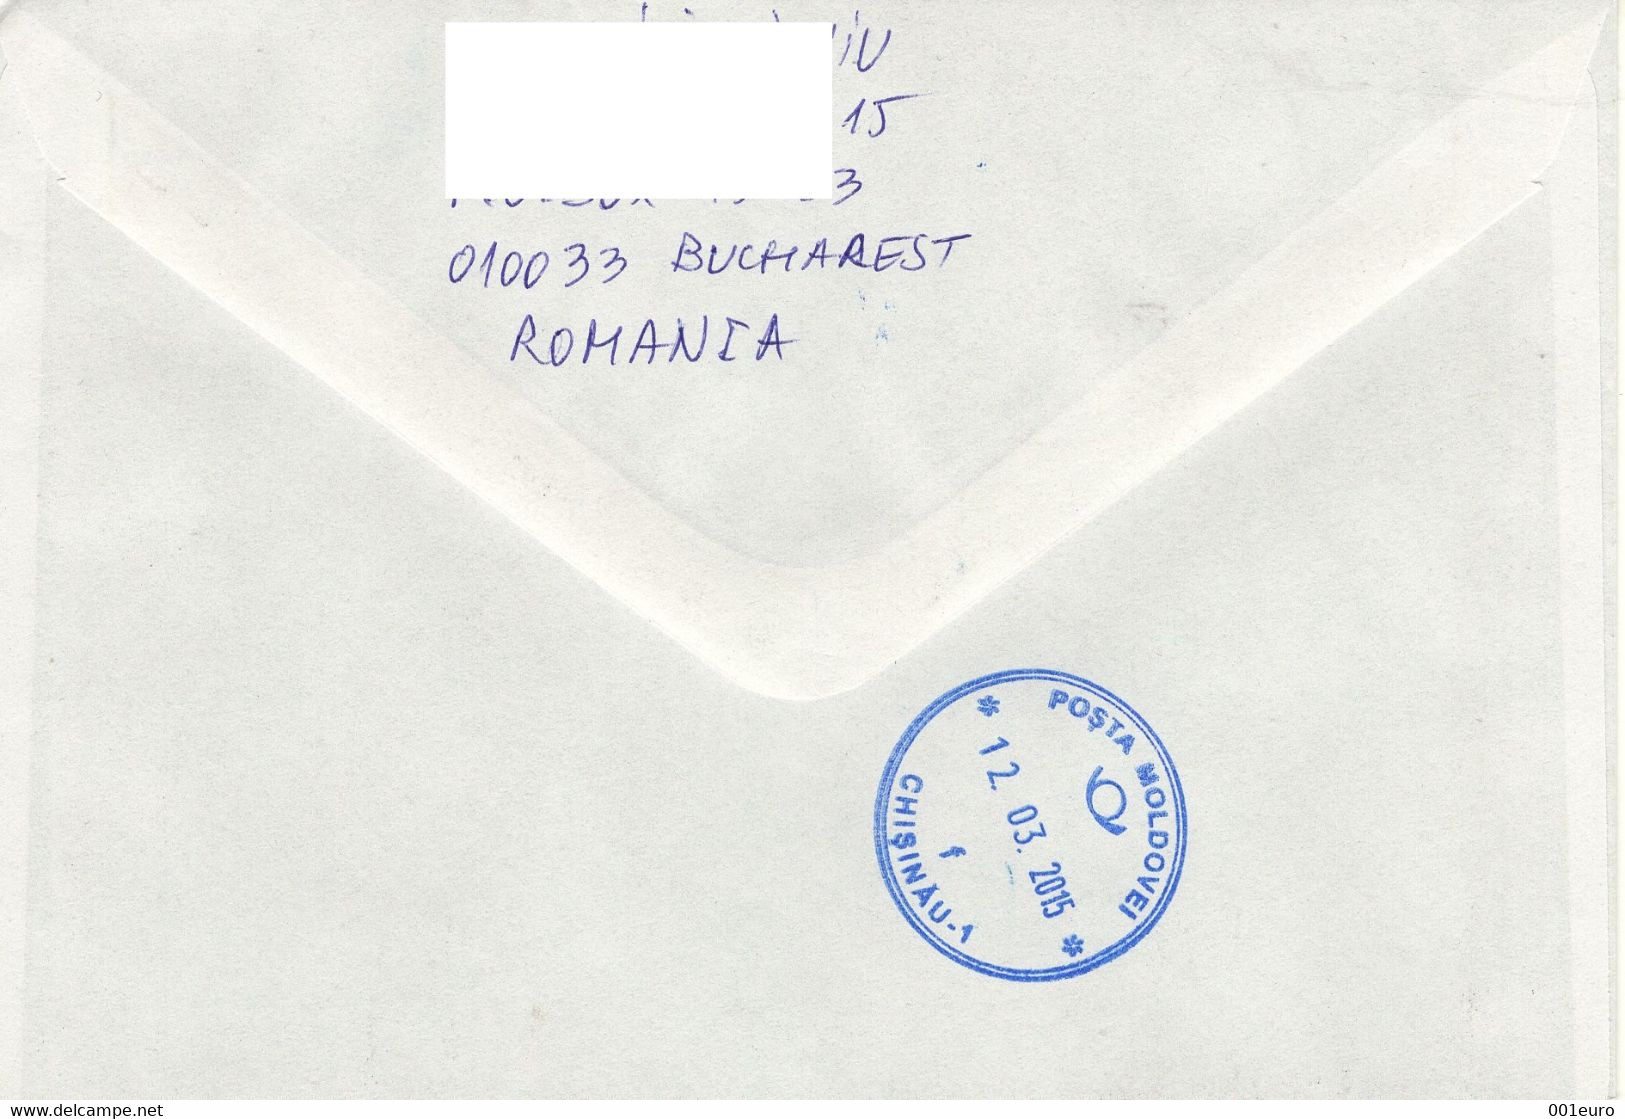 ROMANIA 2010: EUROPA - THE LETTER On REGISTERED Cover Circulated To Moldova Republic - Registered Shipping! - Cartas & Documentos